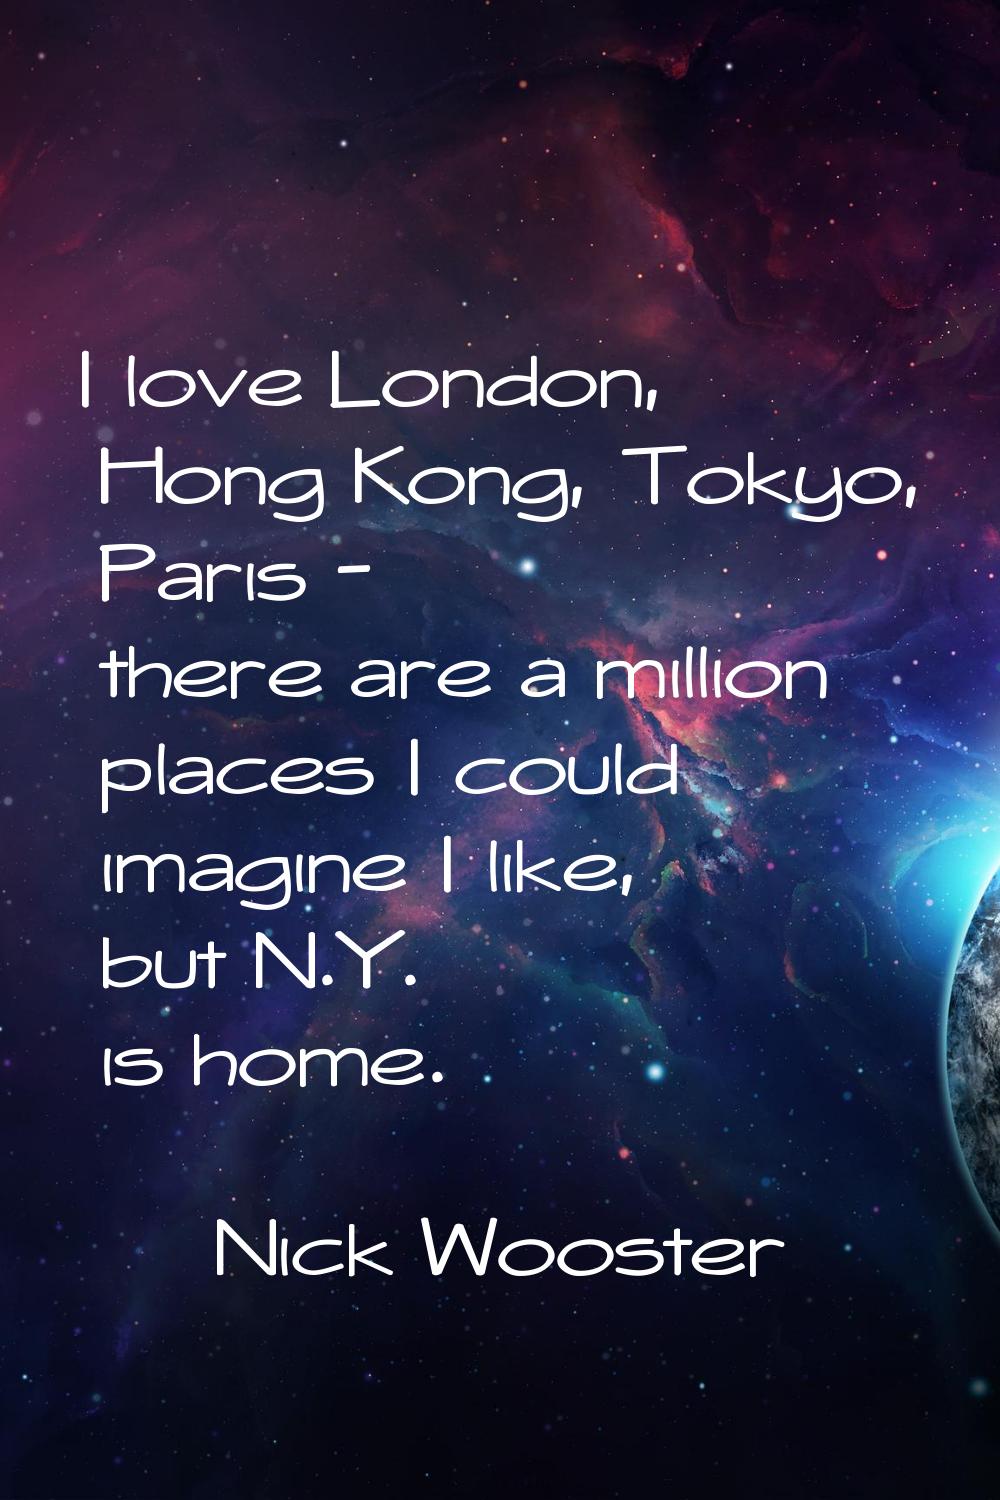 I love London, Hong Kong, Tokyo, Paris - there are a million places I could imagine I like, but N.Y